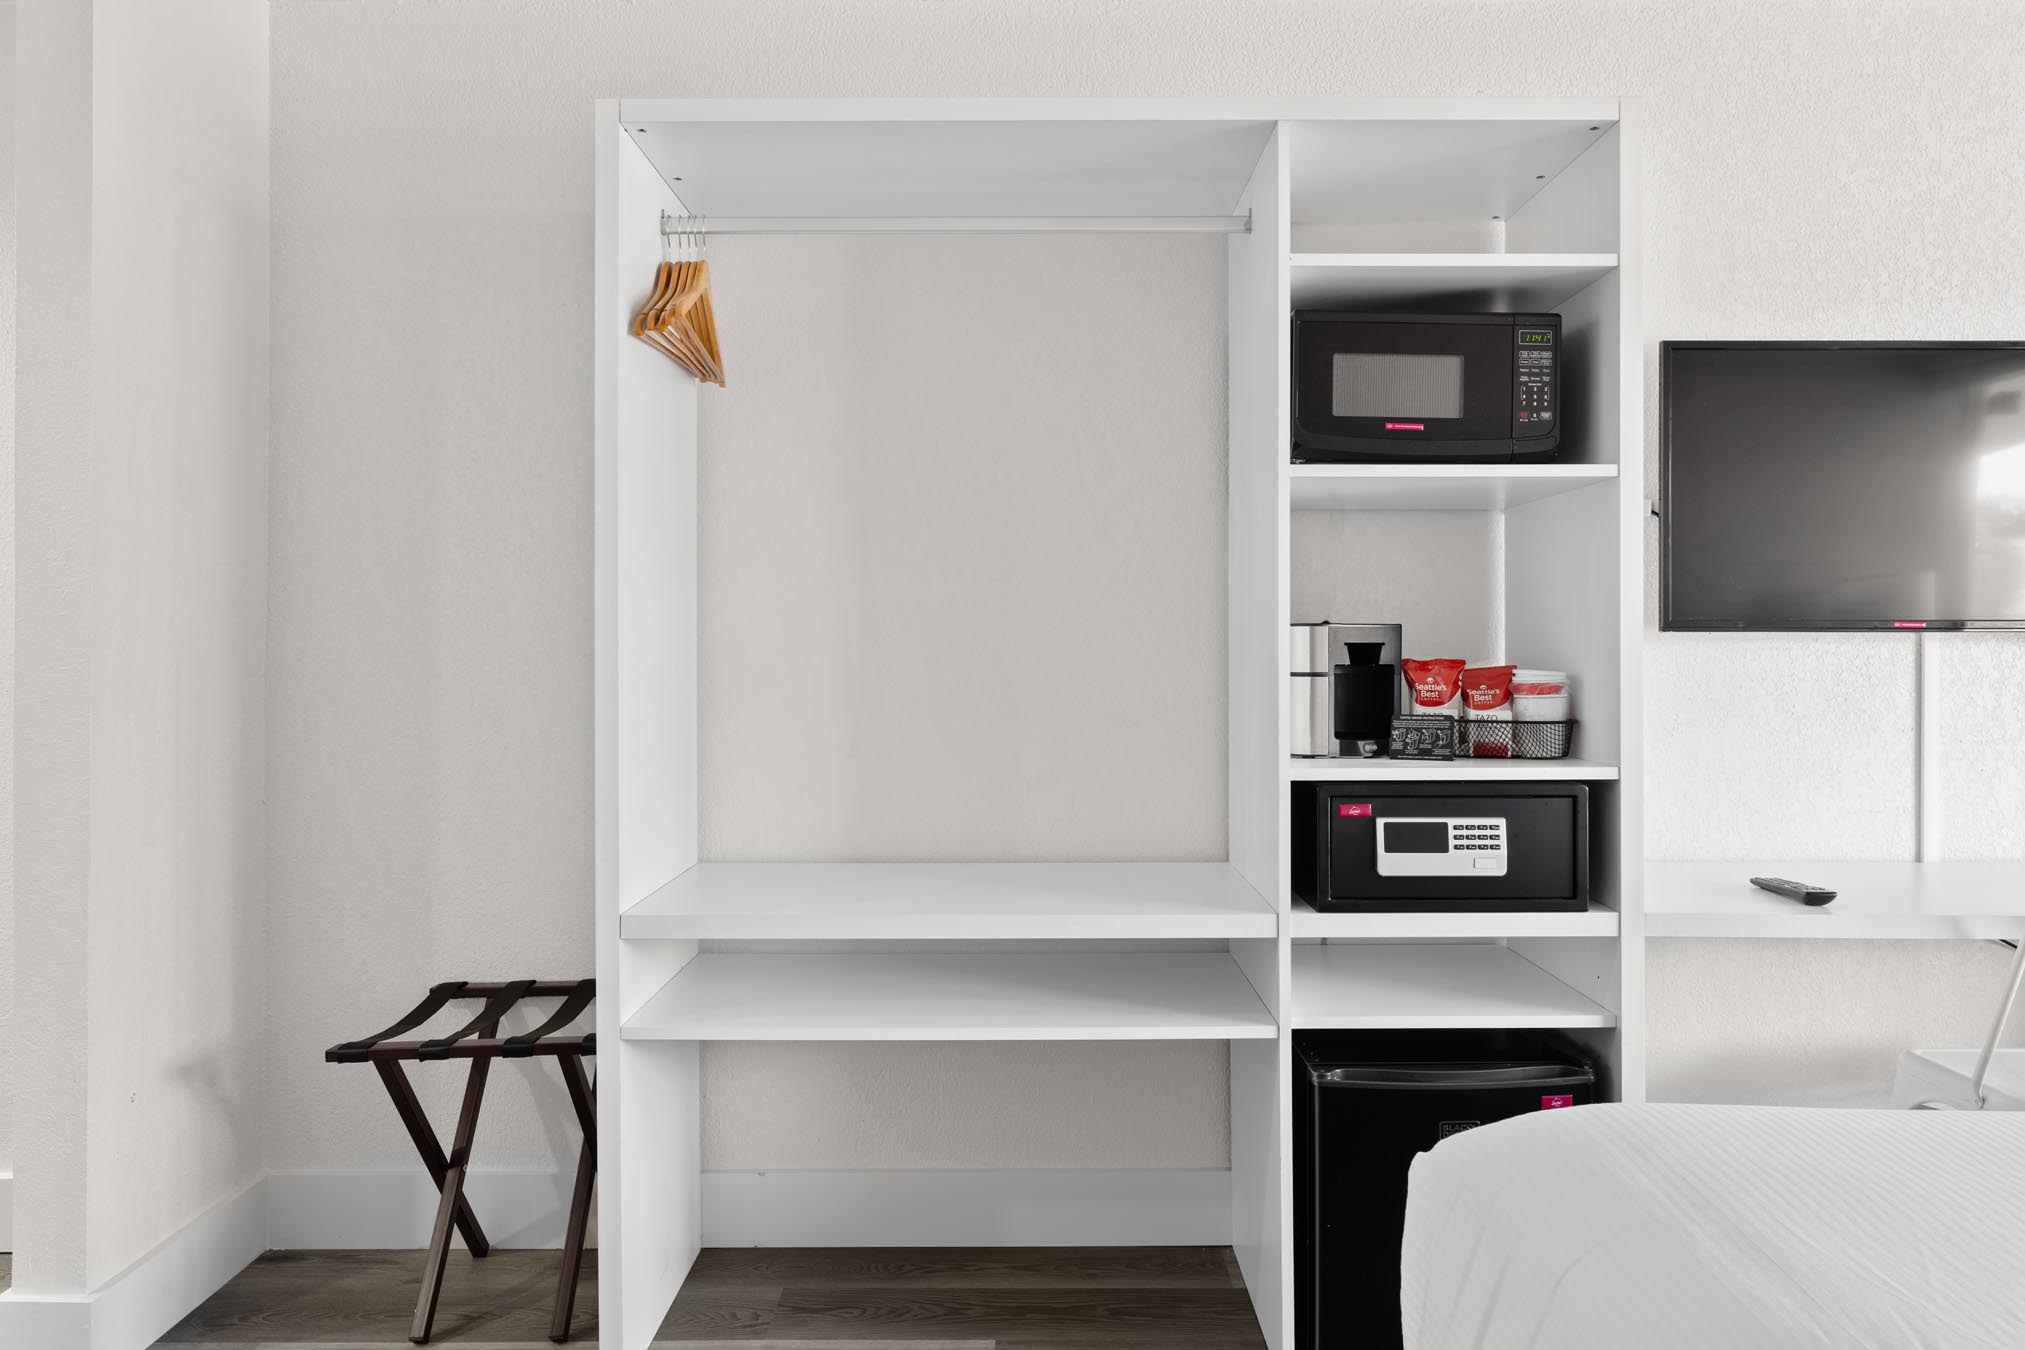 Wall unit closet with mini fridge, microwave, safe, and mounted TV